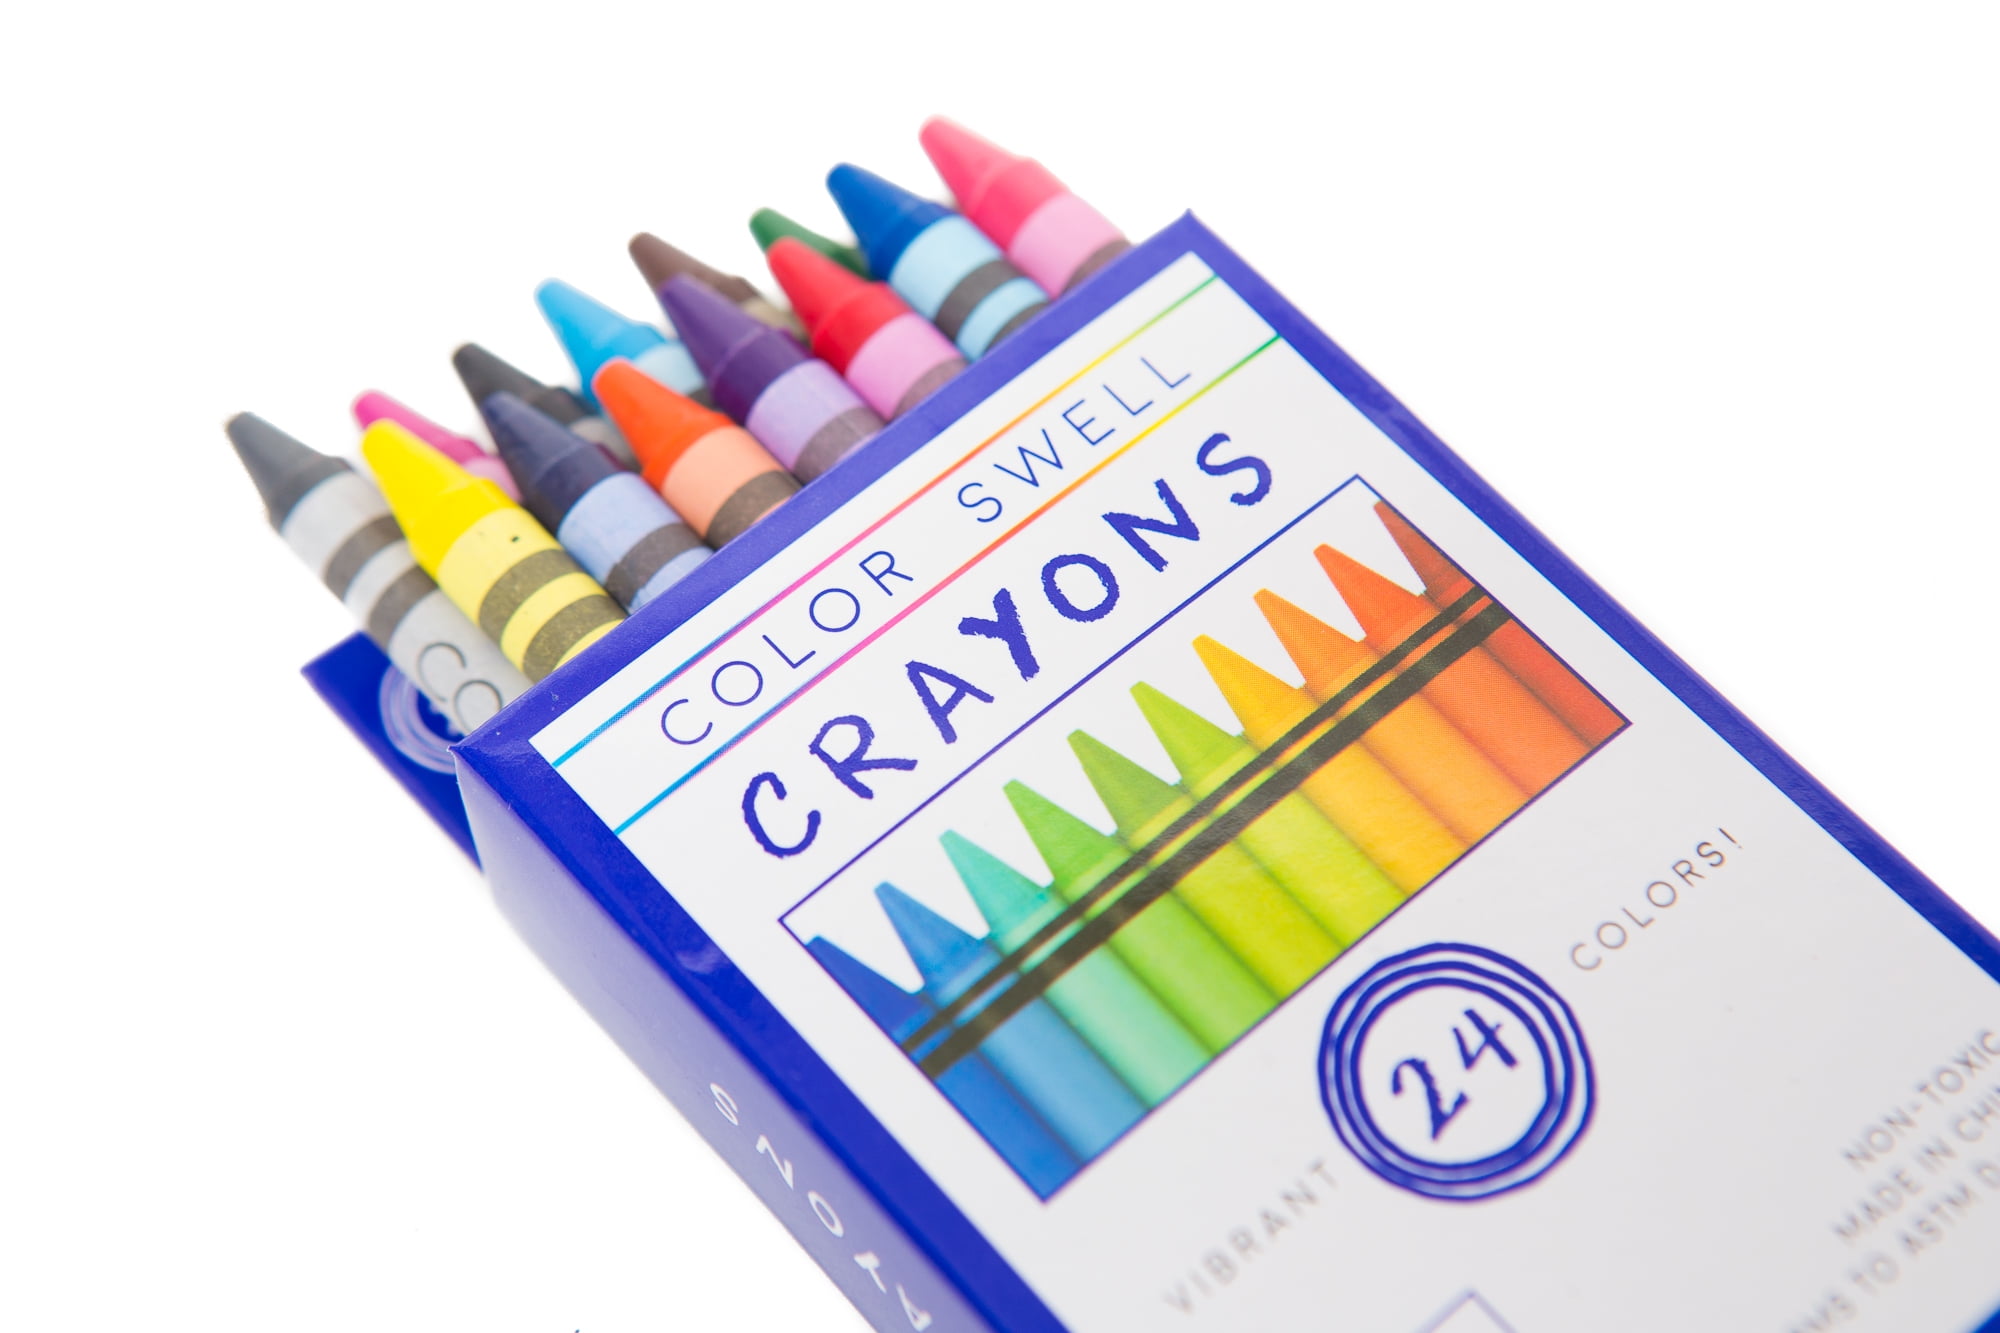 Color Swell Crayon Bulk Pack (18 Packs, 24 Crayons/Pack), 1 - QFC